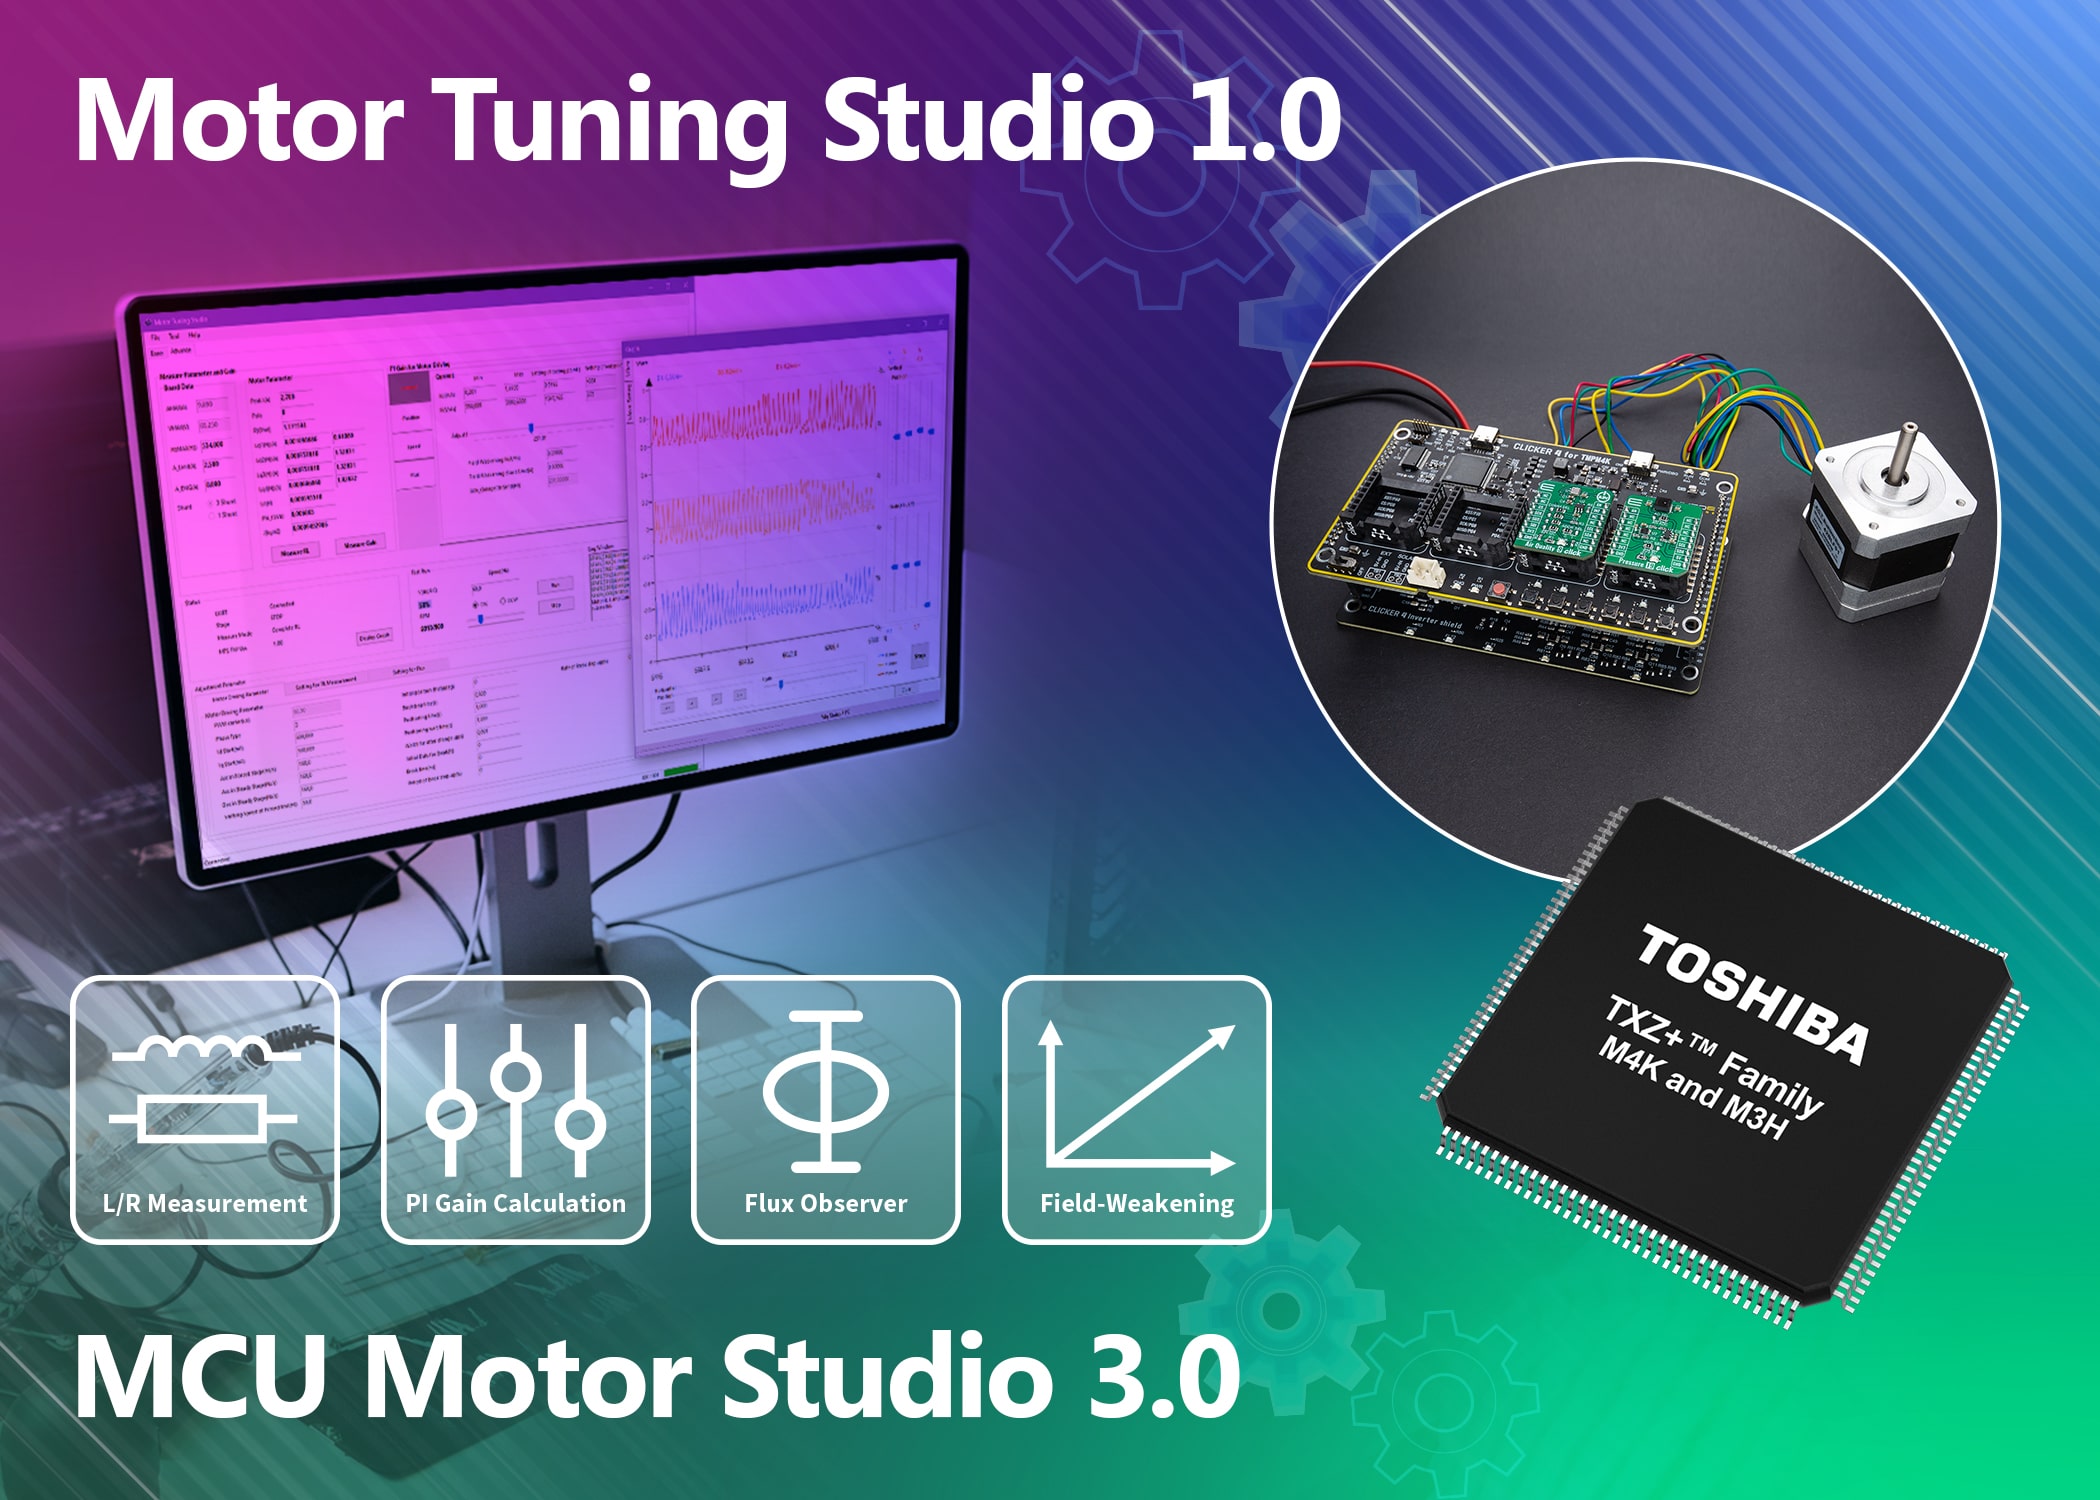 Toshiba software for motor-drive development supports faster time to market